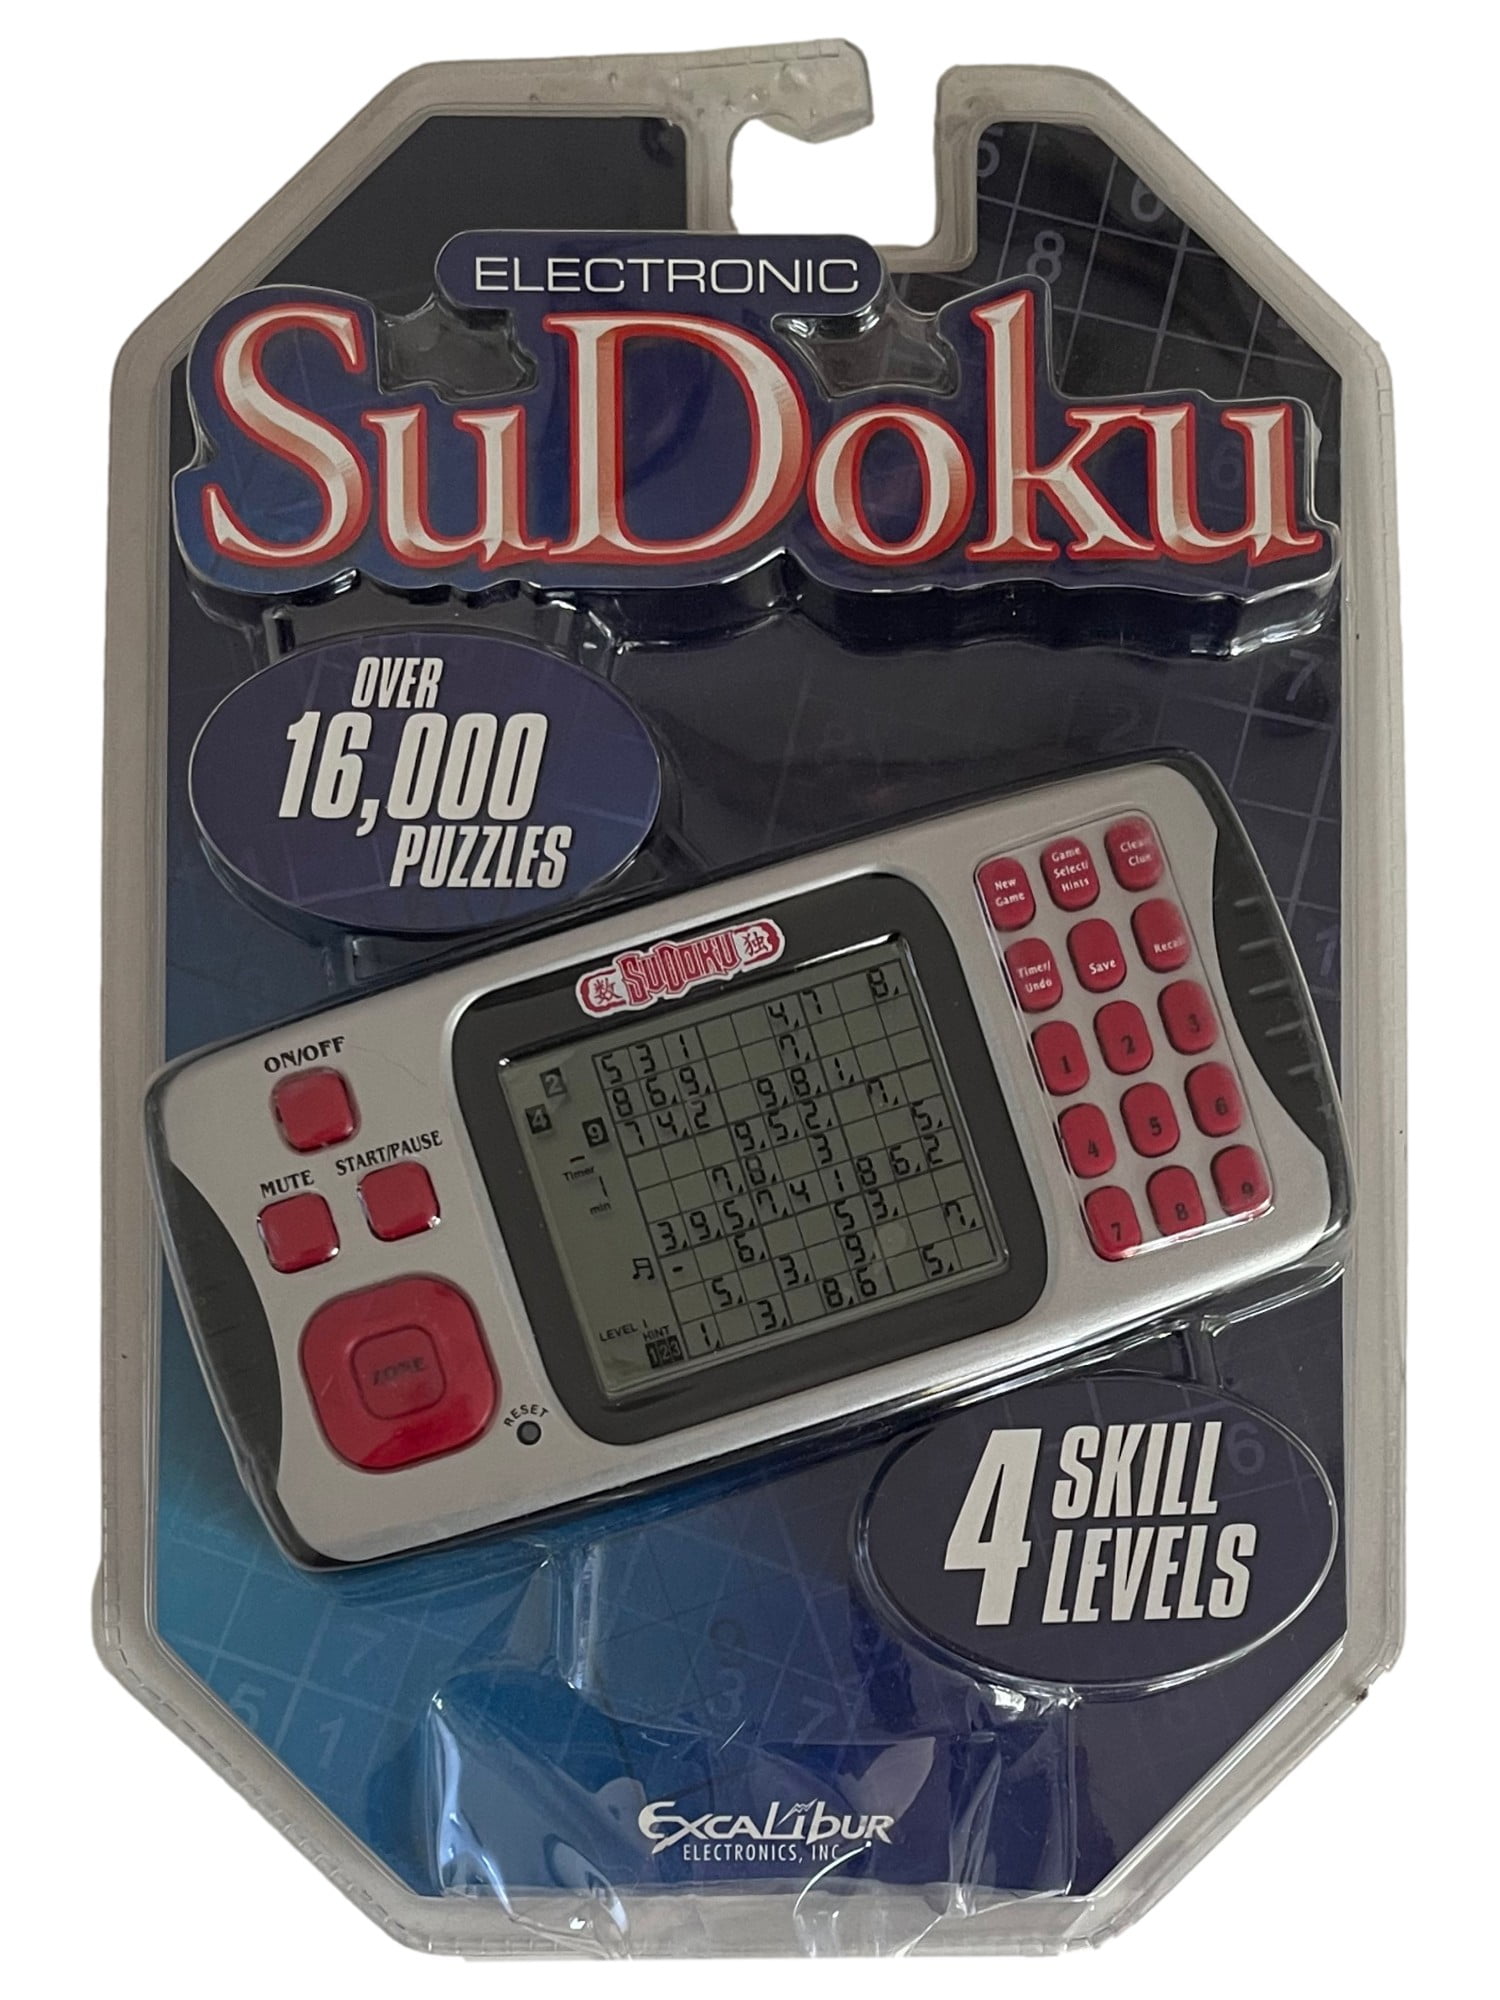 Excalibur Touch Screen Sudoku Multi Player Handheld Game